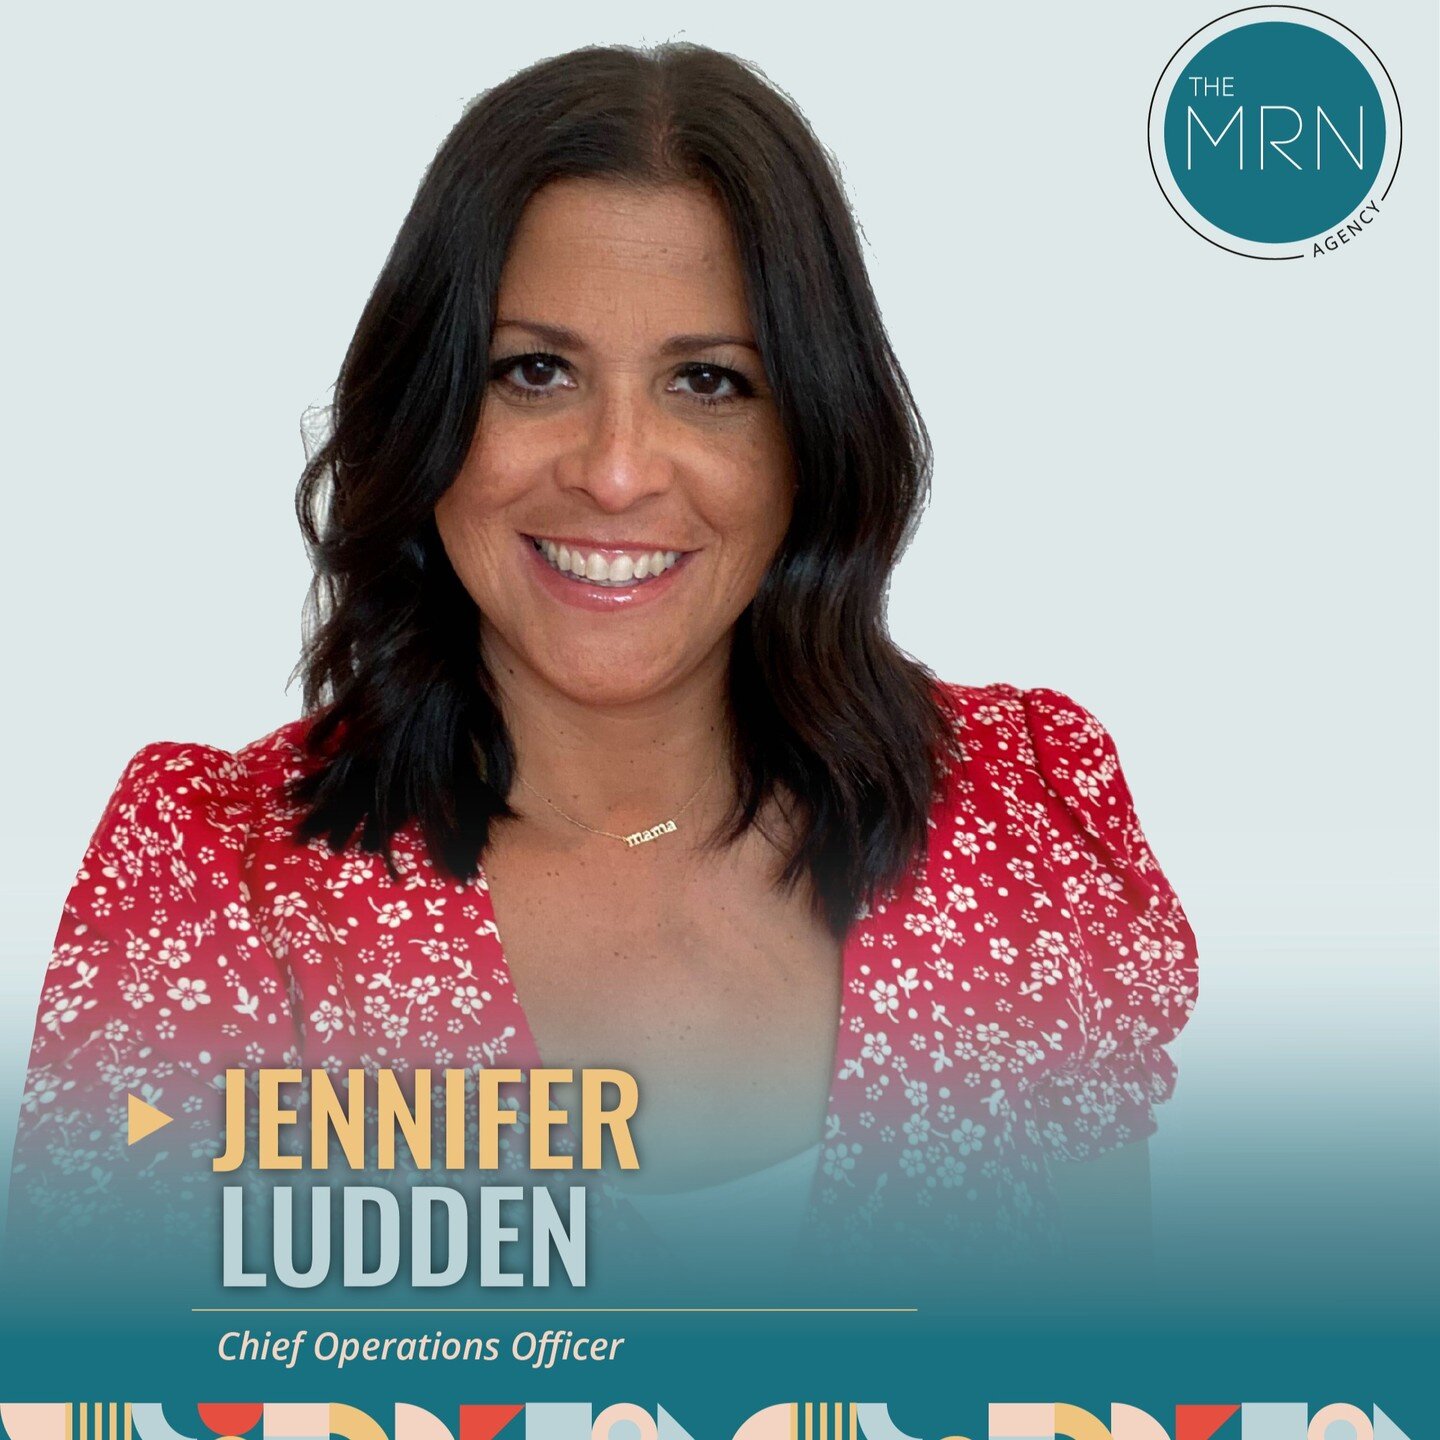 MRN is excited to announce&nbsp;Jennifer Ludden&nbsp;as our new Chief Operations Officer!

Focused on Operations &amp; Finance, she has over 20+ years of industry experience with 14+ years of experience as a Co-Founder / CFO. A Texas native, she move